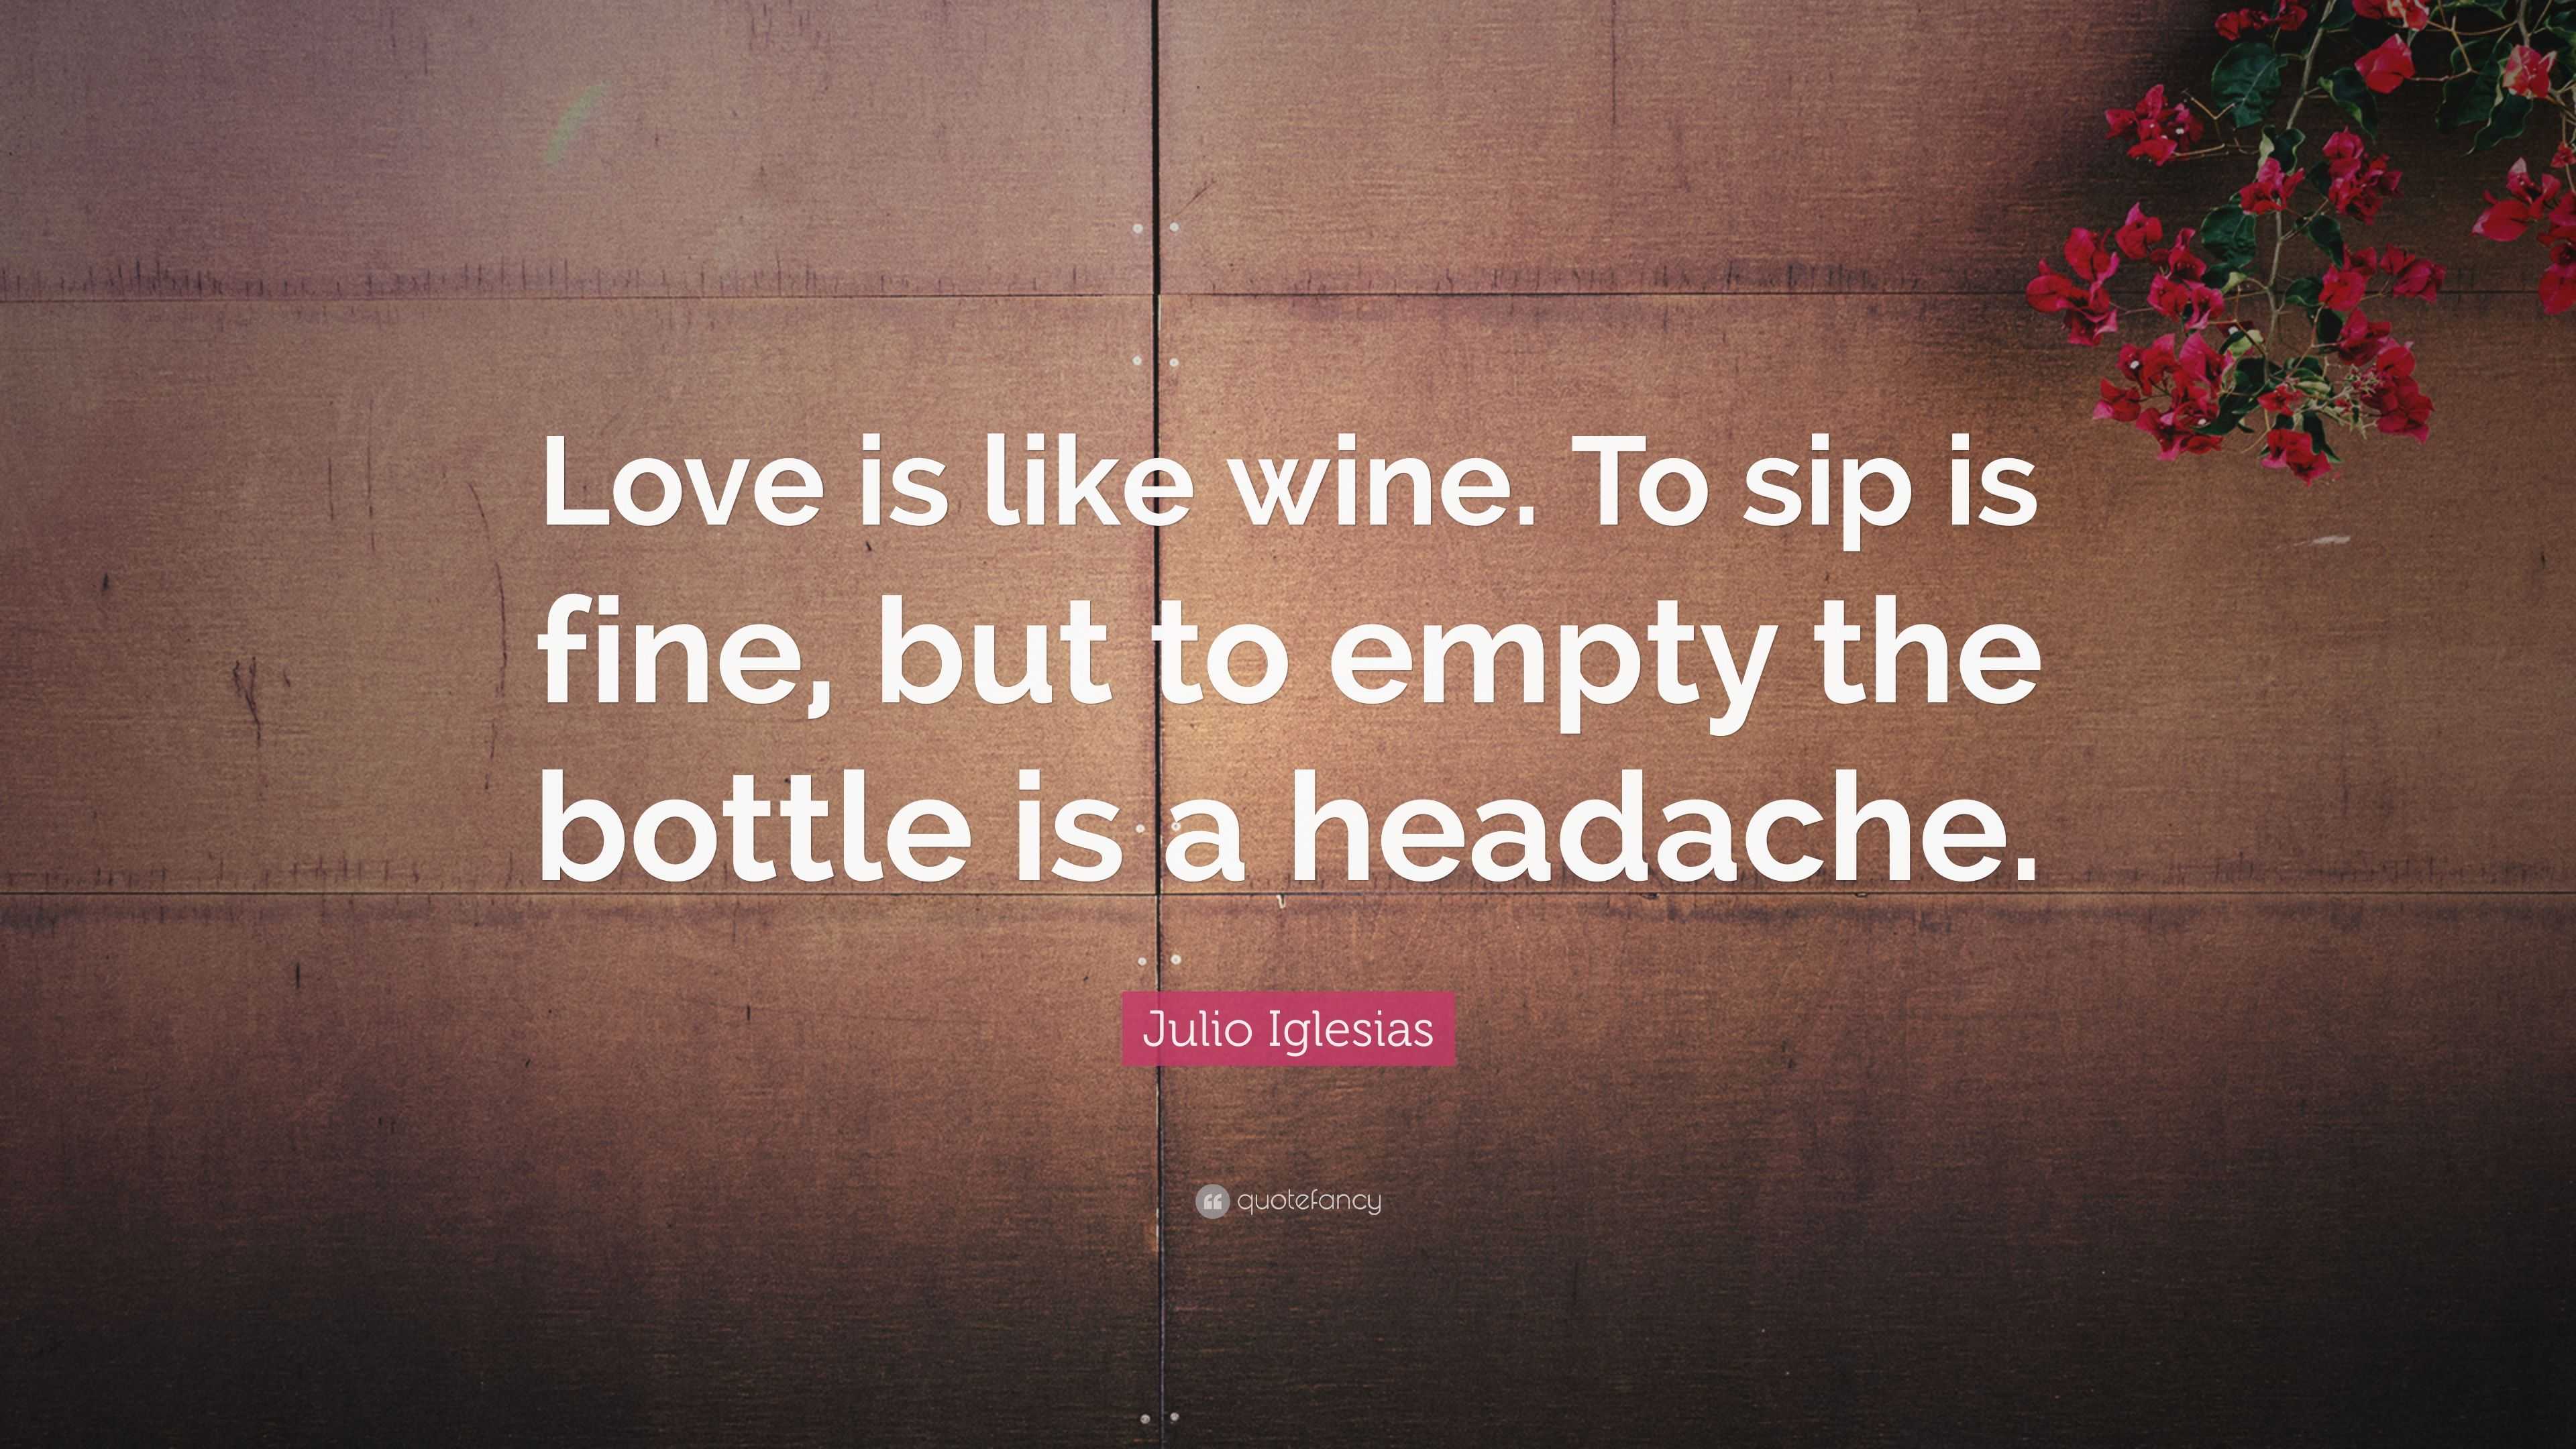 Julio Iglesias Quote “Love is like wine To sip is fine but